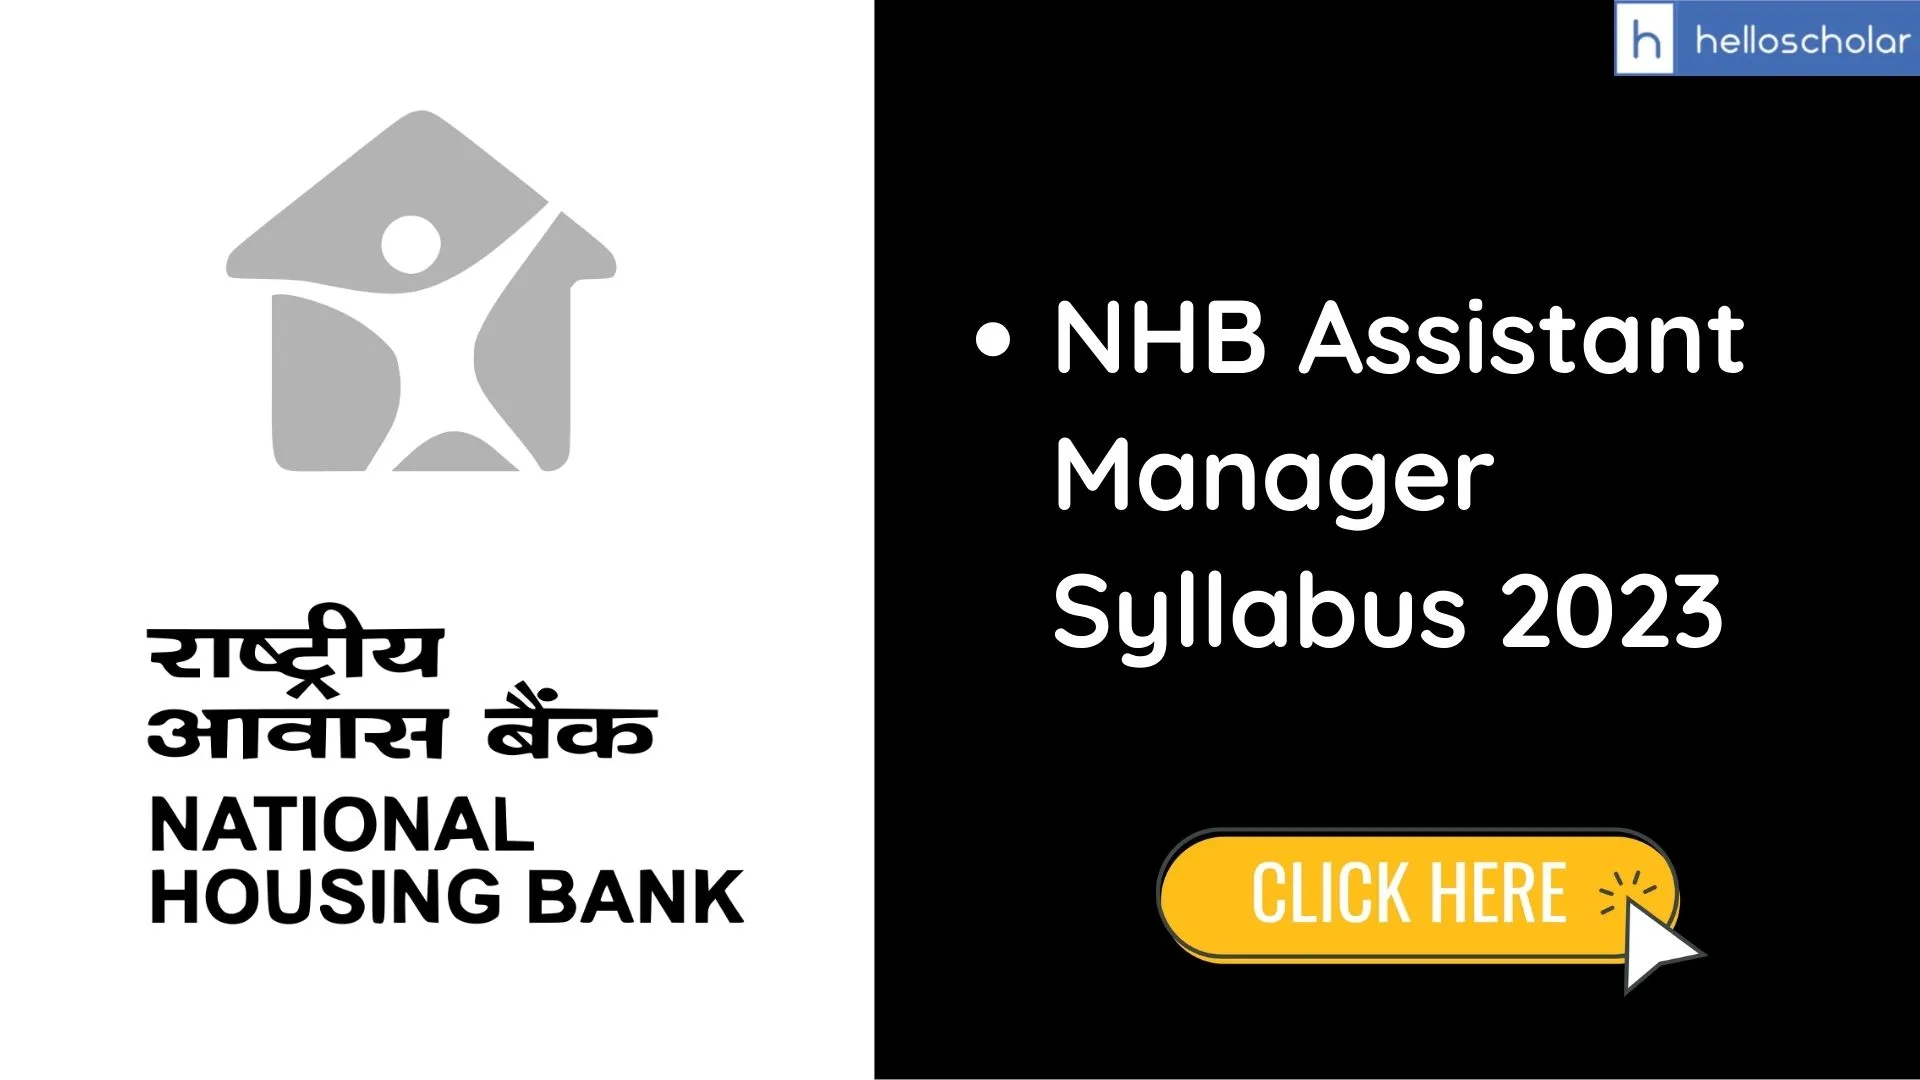 NHB Assistant Manager Syllabus 2023, Check Exam Pattern, Descriptive Test and Interview Process